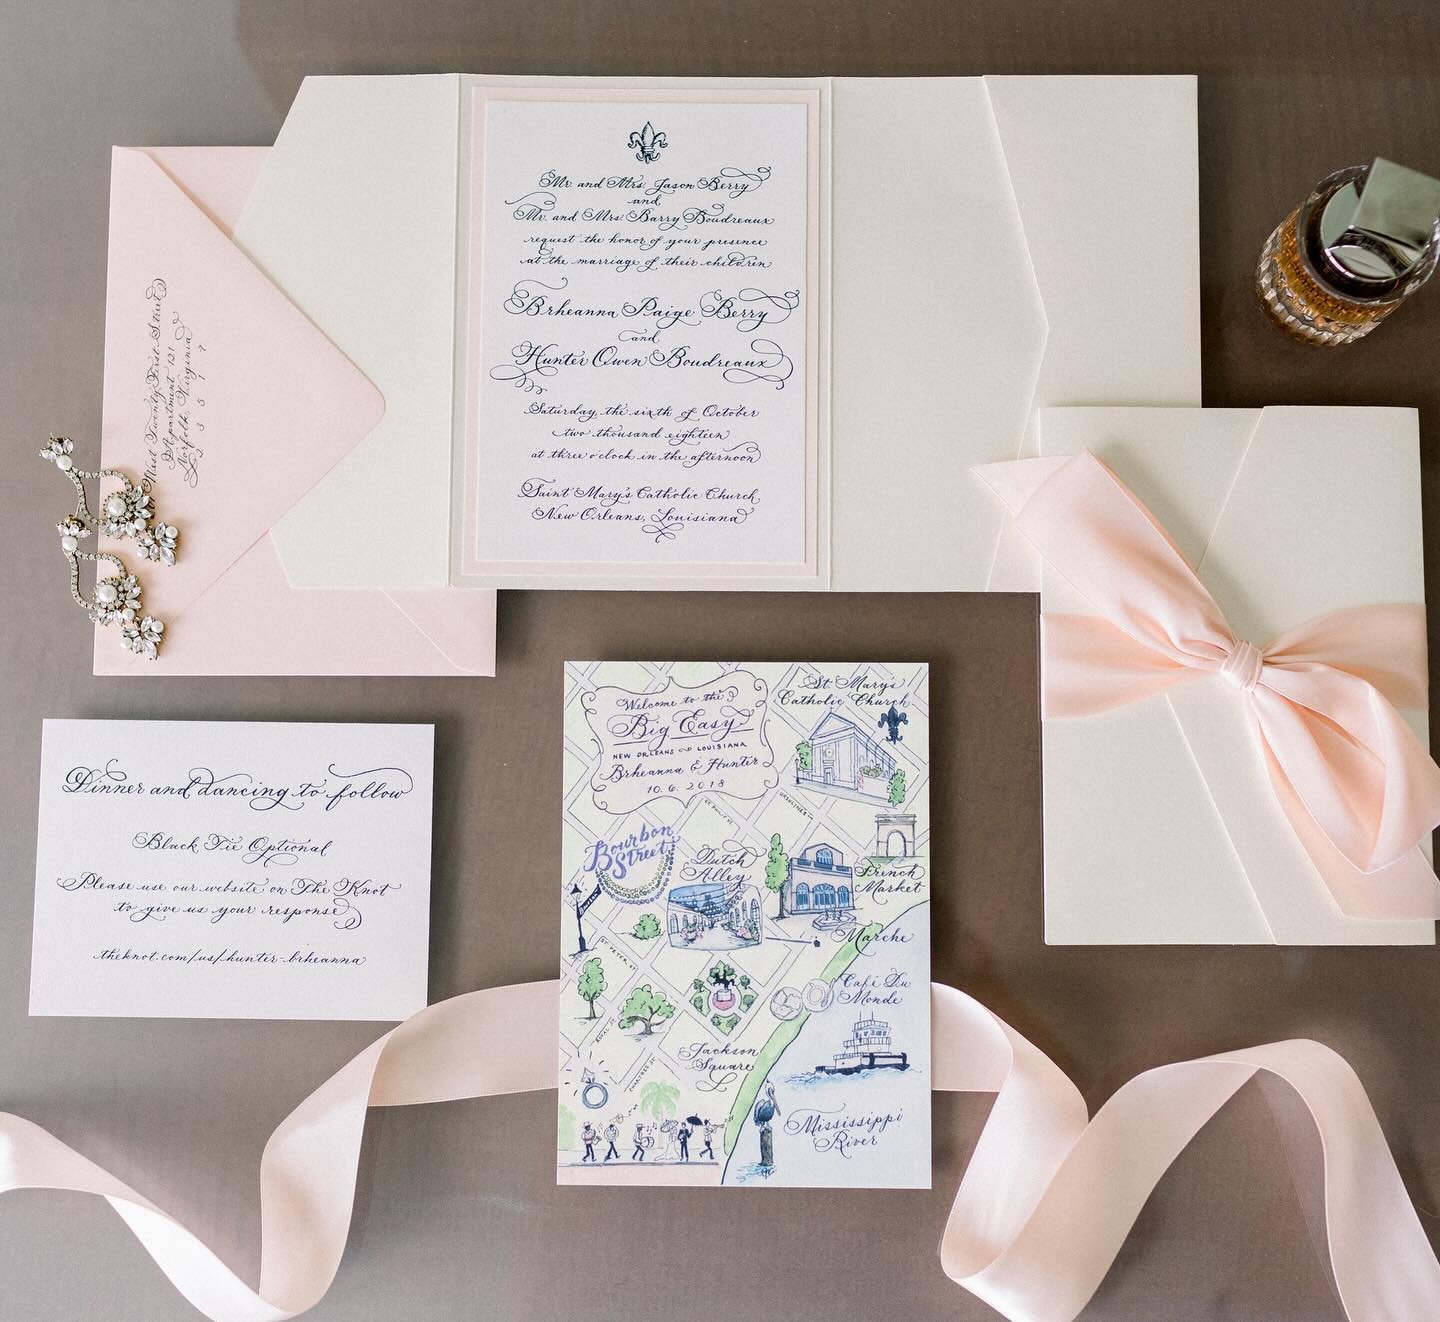 Watercolor map of New Orleans slipped into a custom calligraphy pocket fold tied with a blush ribbon. 

#luxurywedding #luxuryinvitations #pocketfold #weddinginvitations #weddingstationery #stationery #calligraphy #pointedpen #weddingmap #weddingsuit